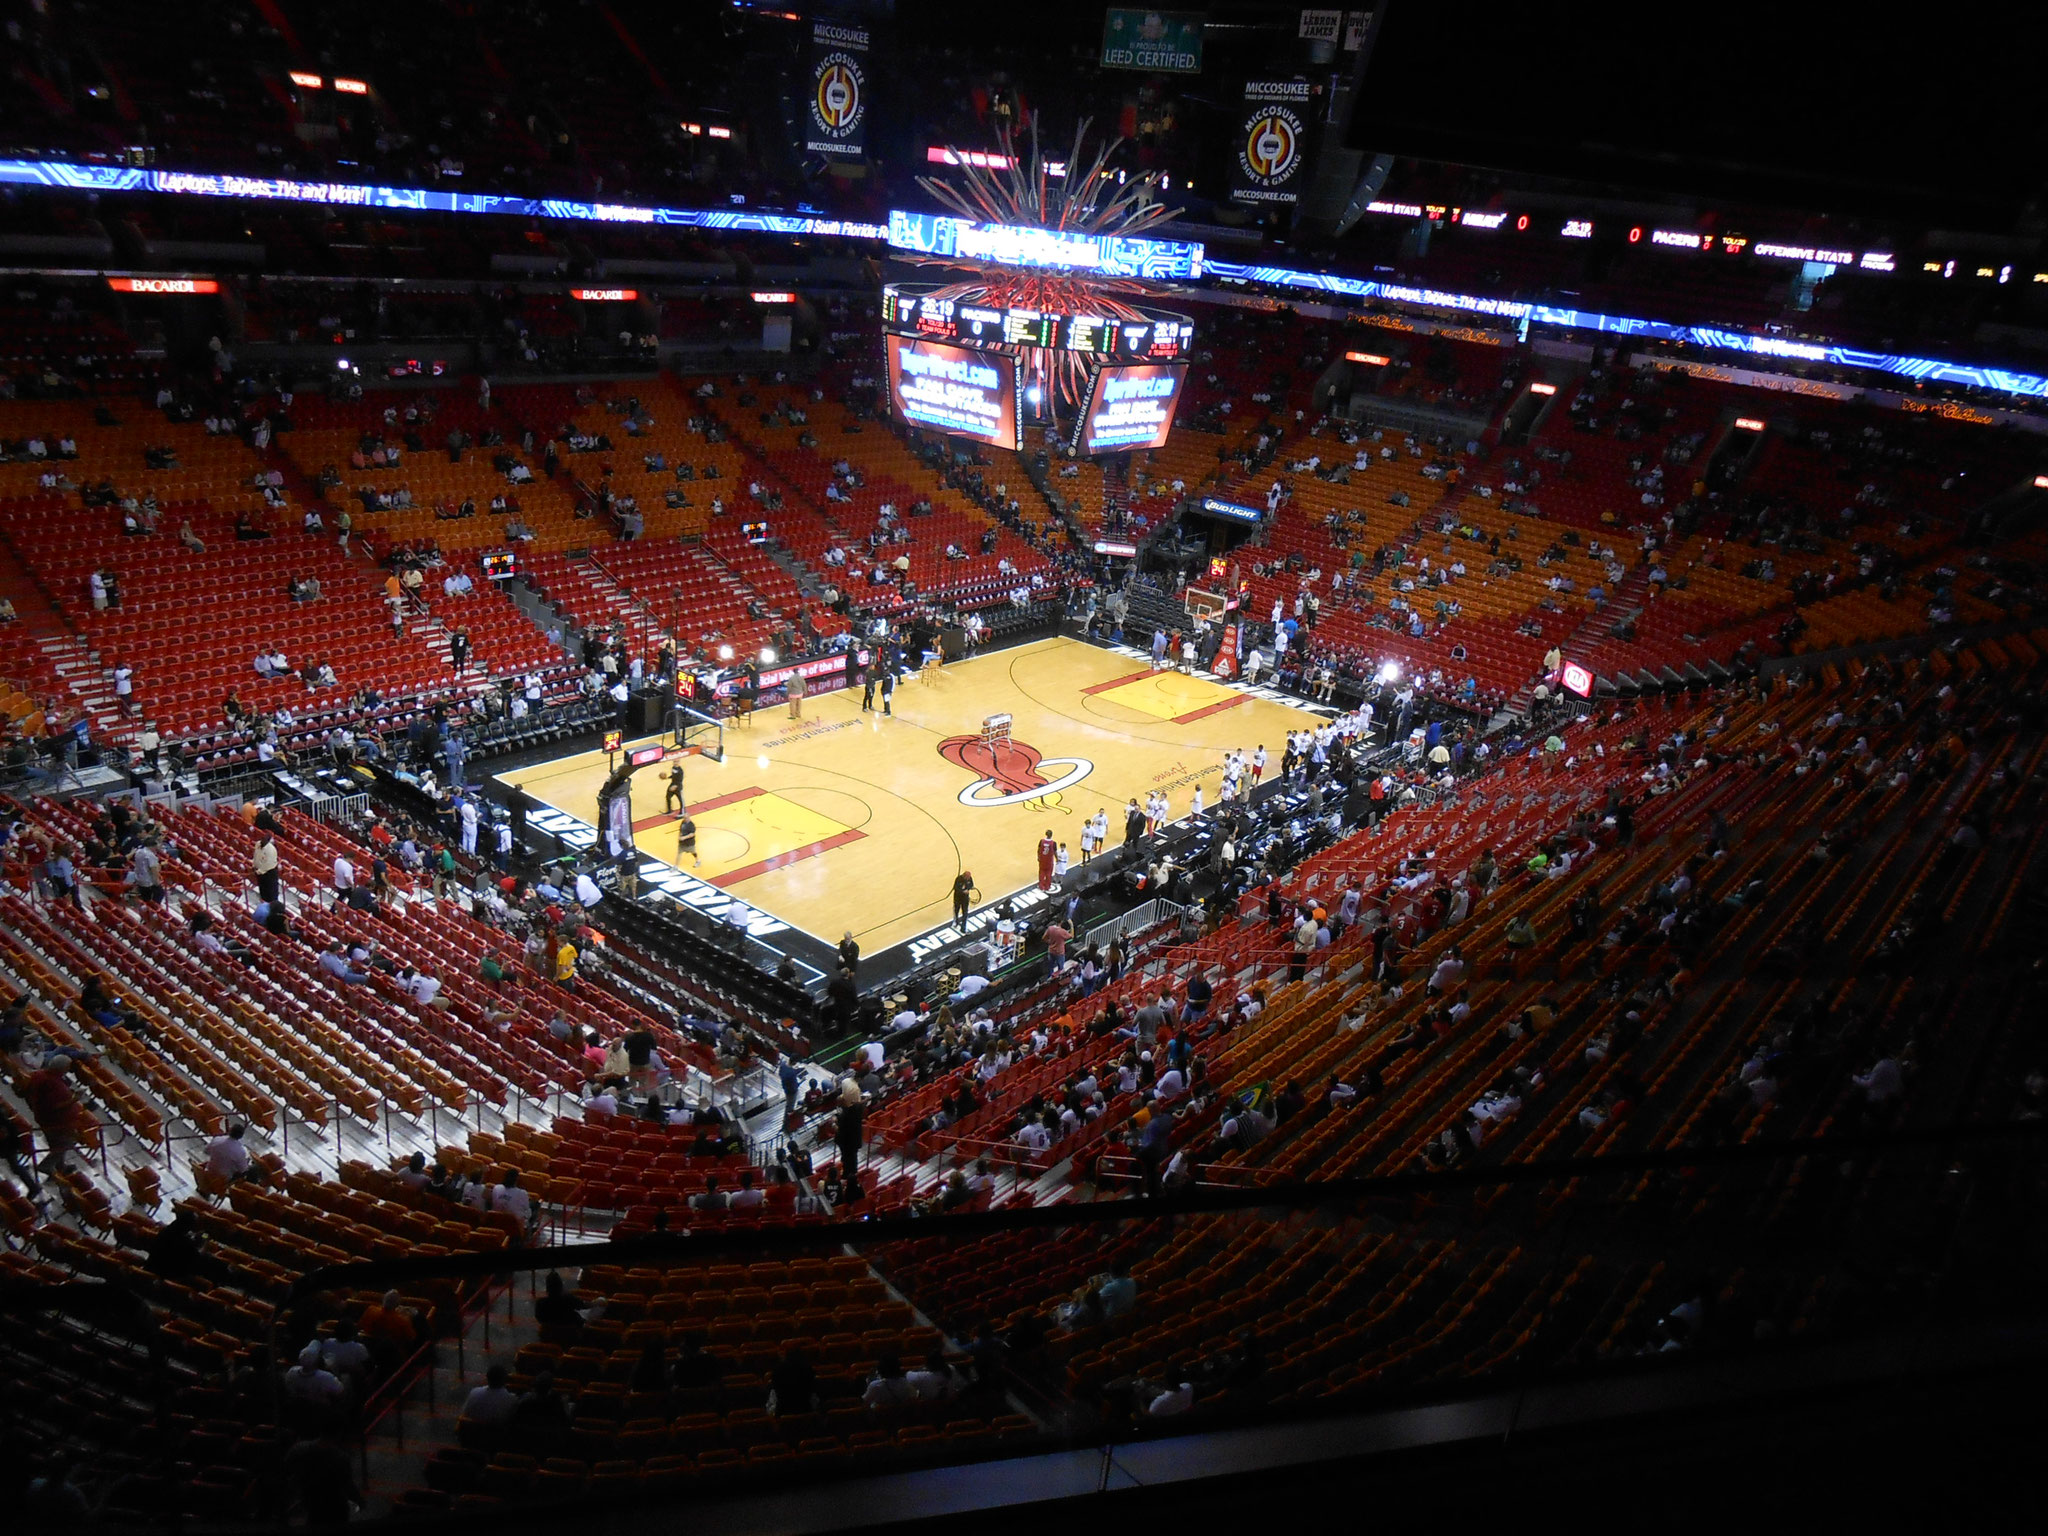 Miami Heat vs Indiana Pacers (2013/14)